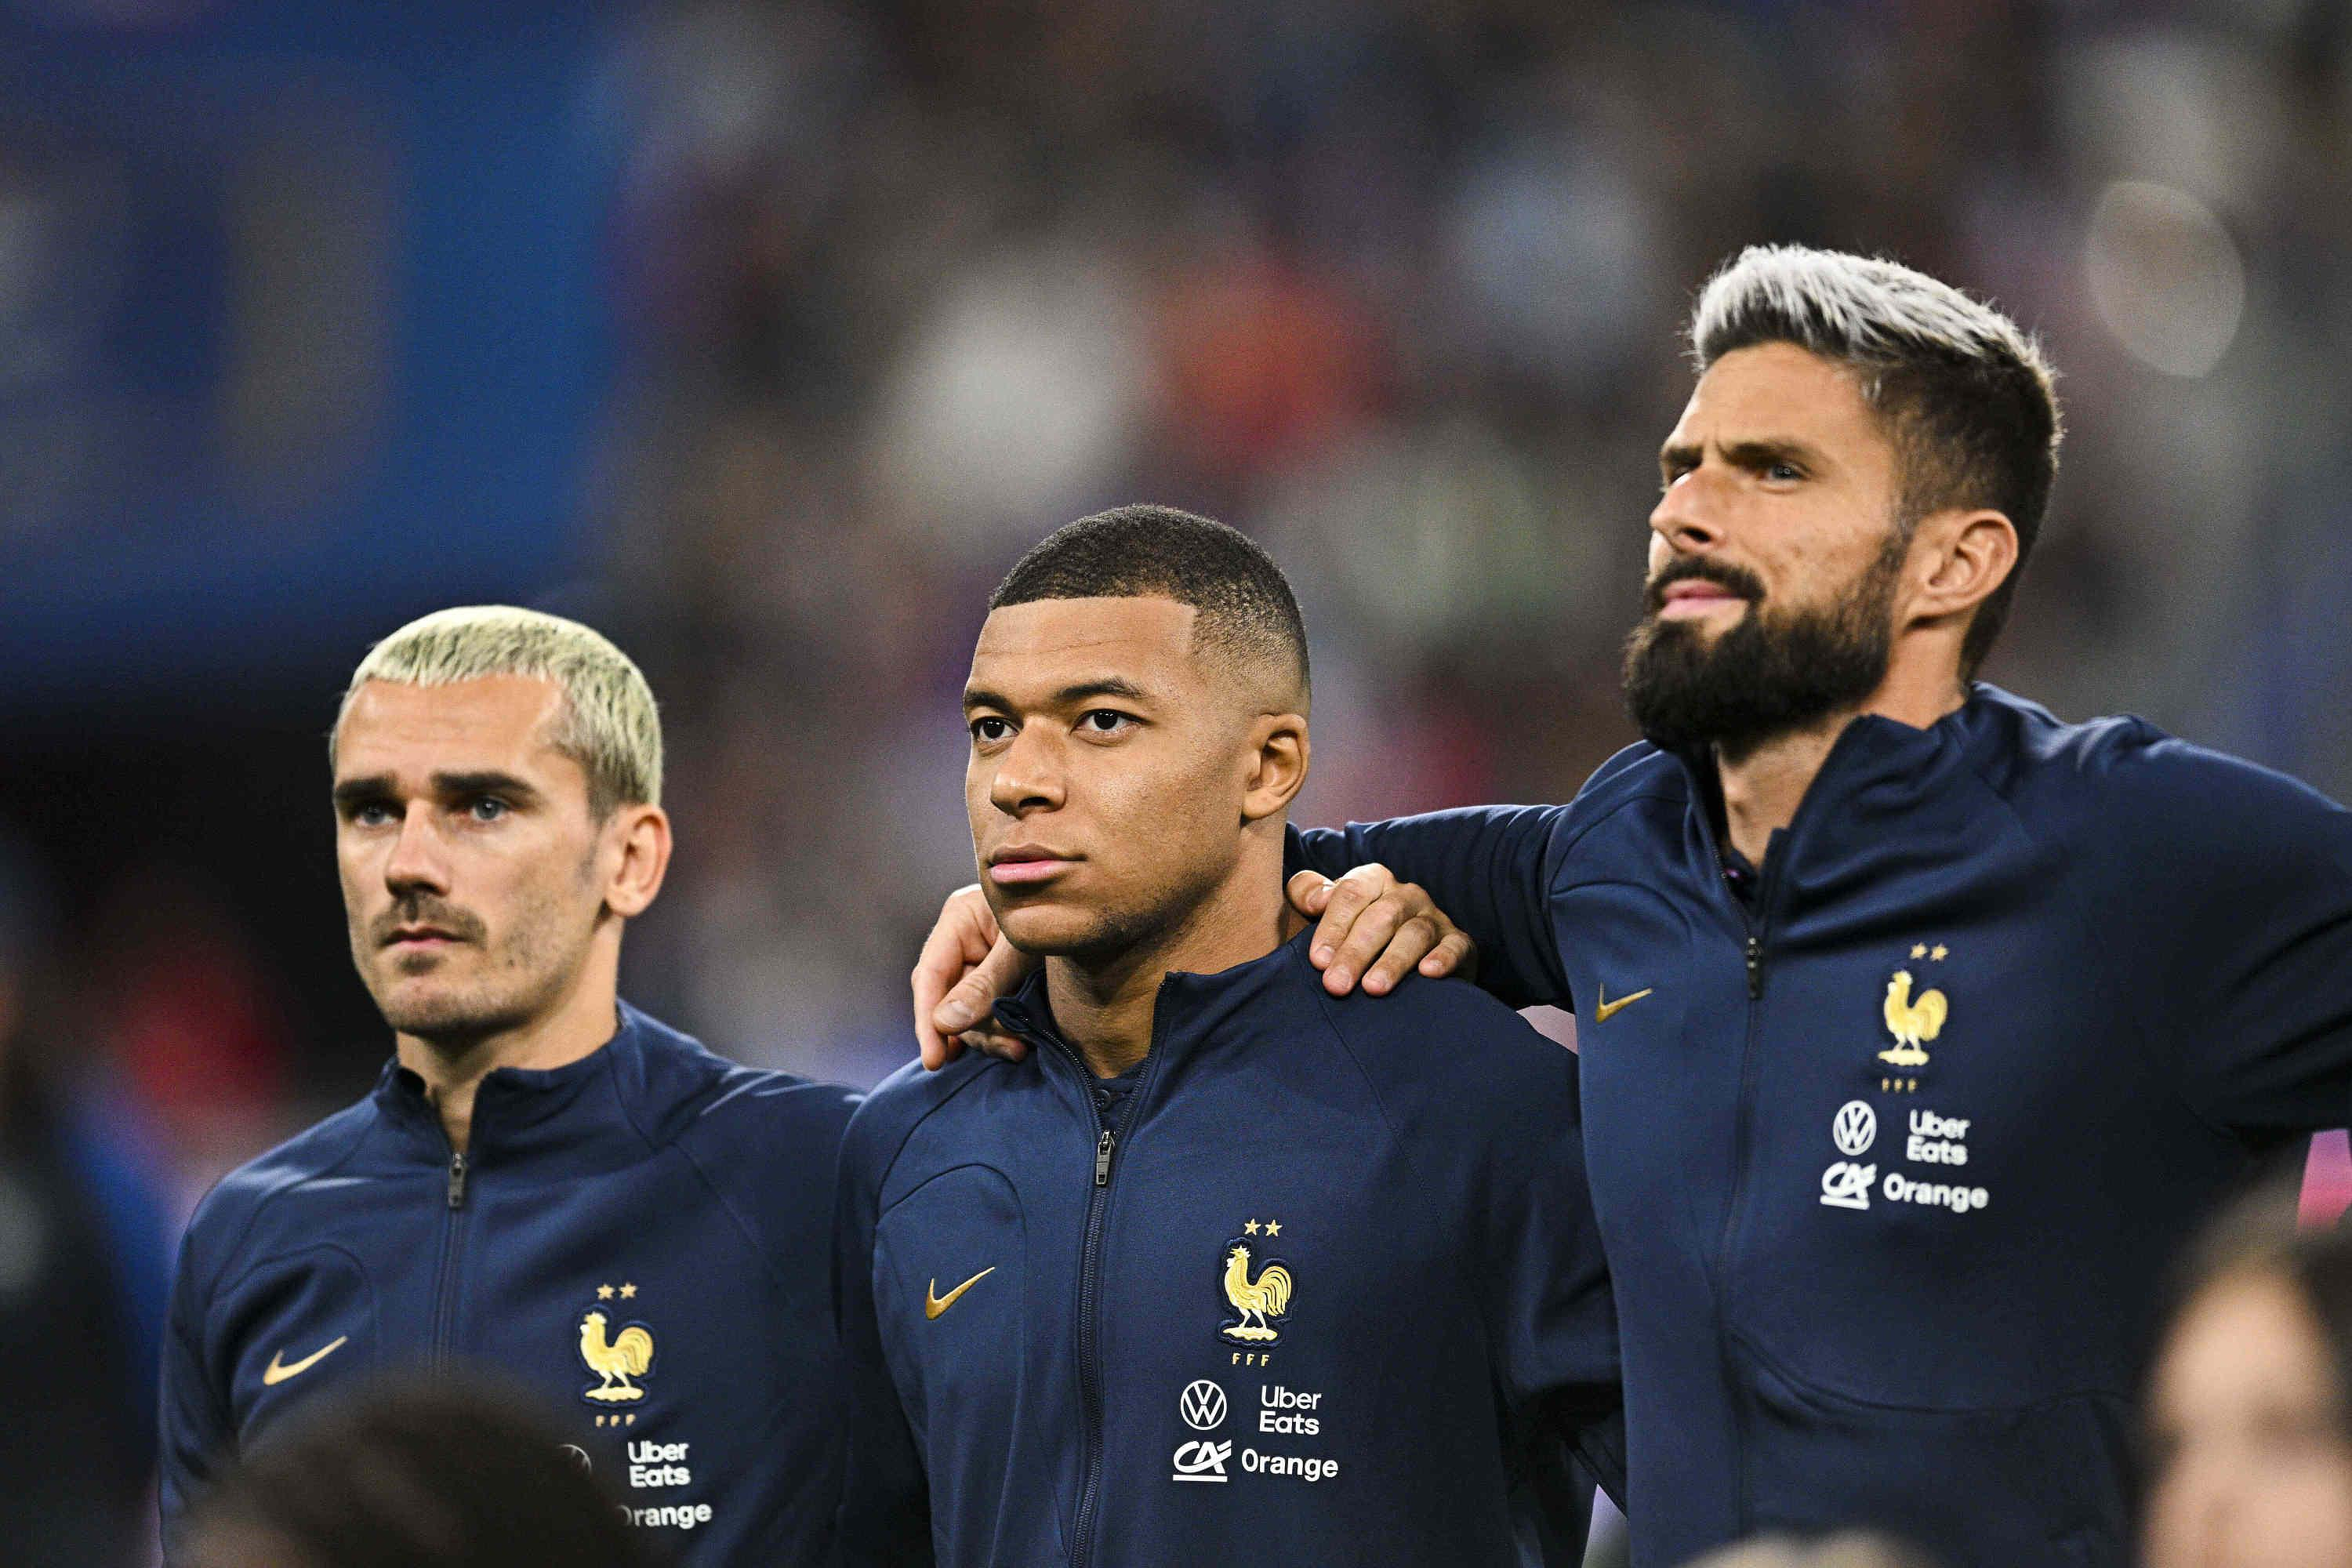 Paris 2024 Olympics: Thierry Henry plans to prioritize Mbappé, Griezmann and Giroud